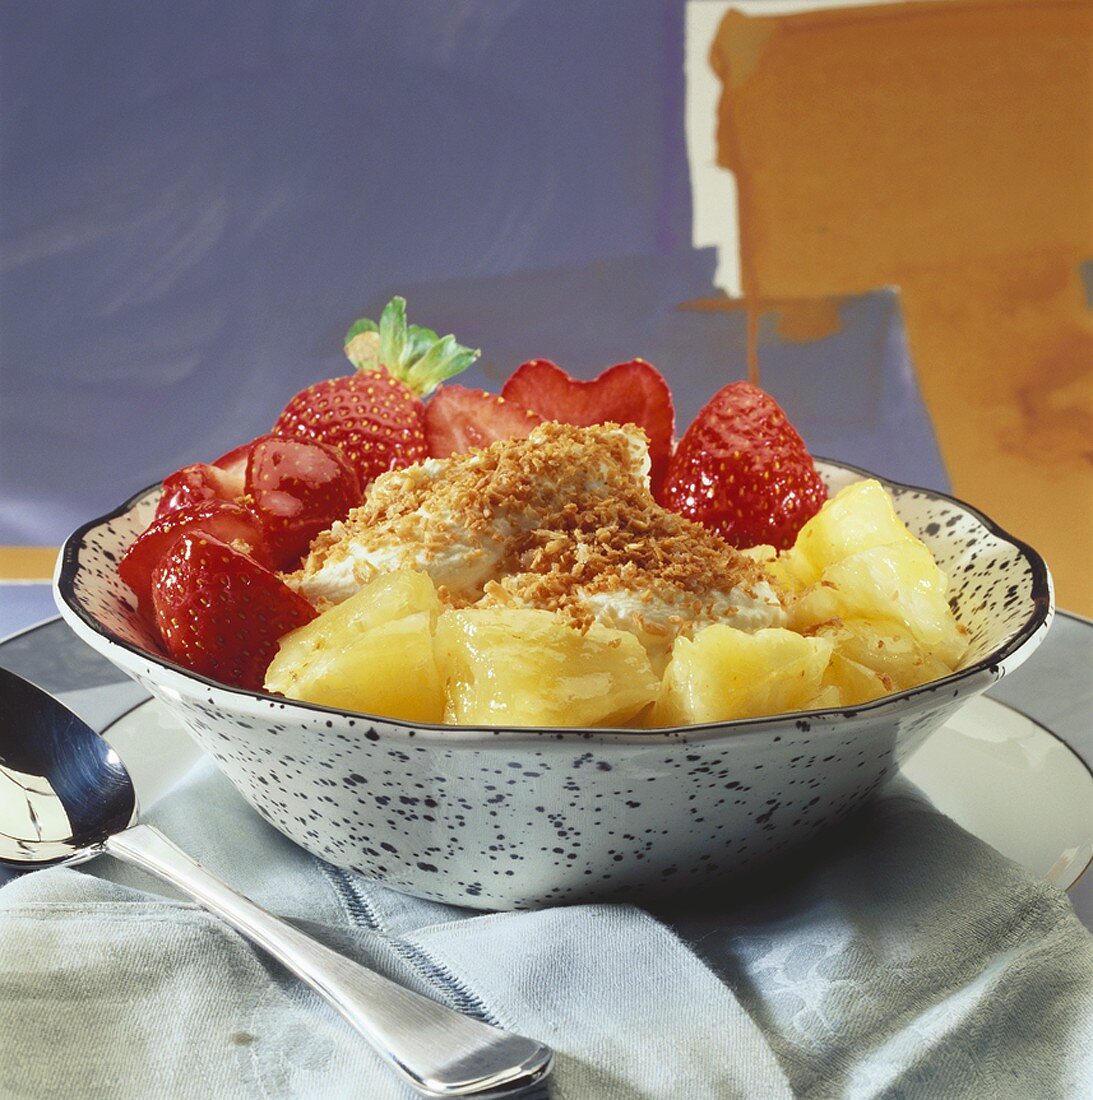 Pineapple and strawberries with rum cream